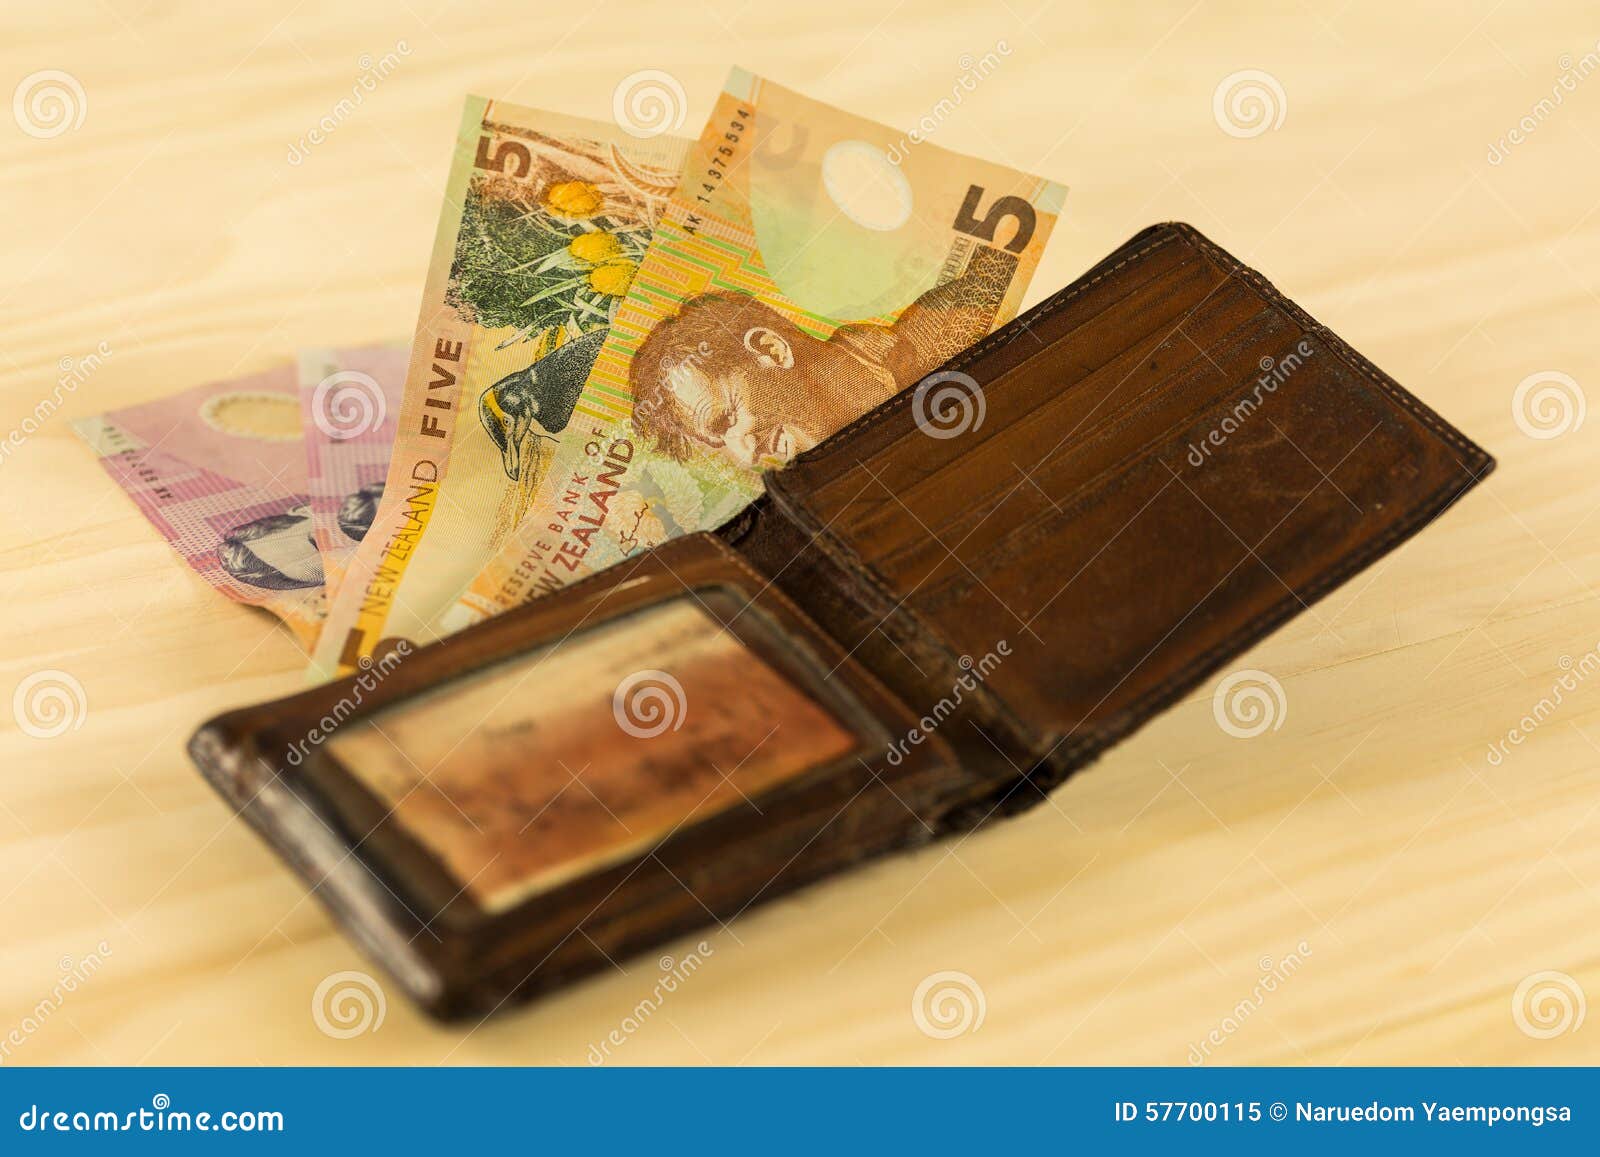 Leather Wallet With New Zealand Bills Stock Image - Image of spend, dollar: 57700115